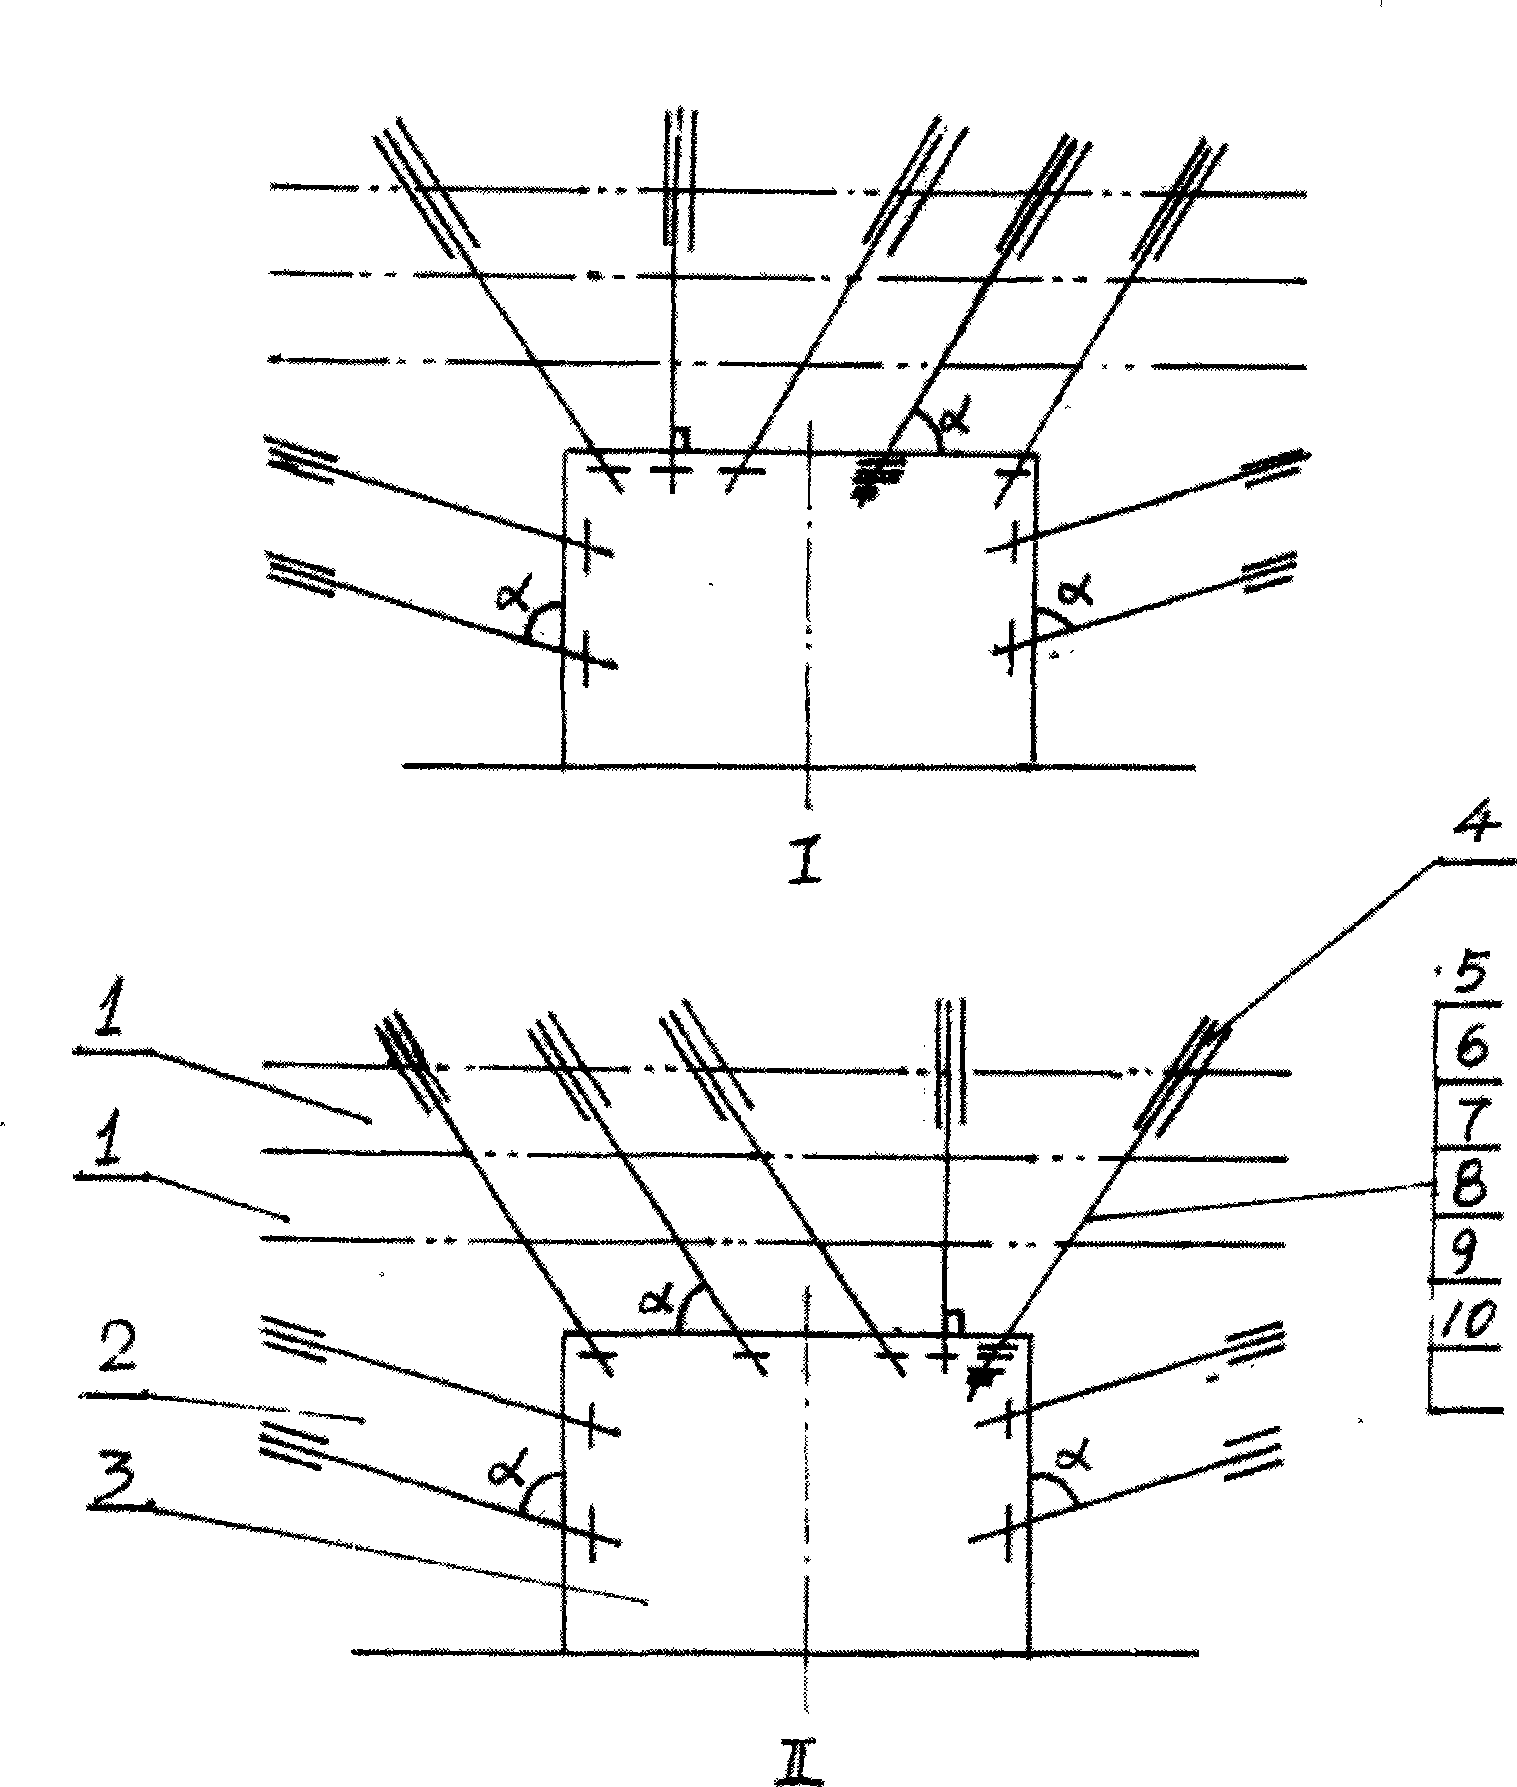 Novel tunnel anchor cable/rod support method